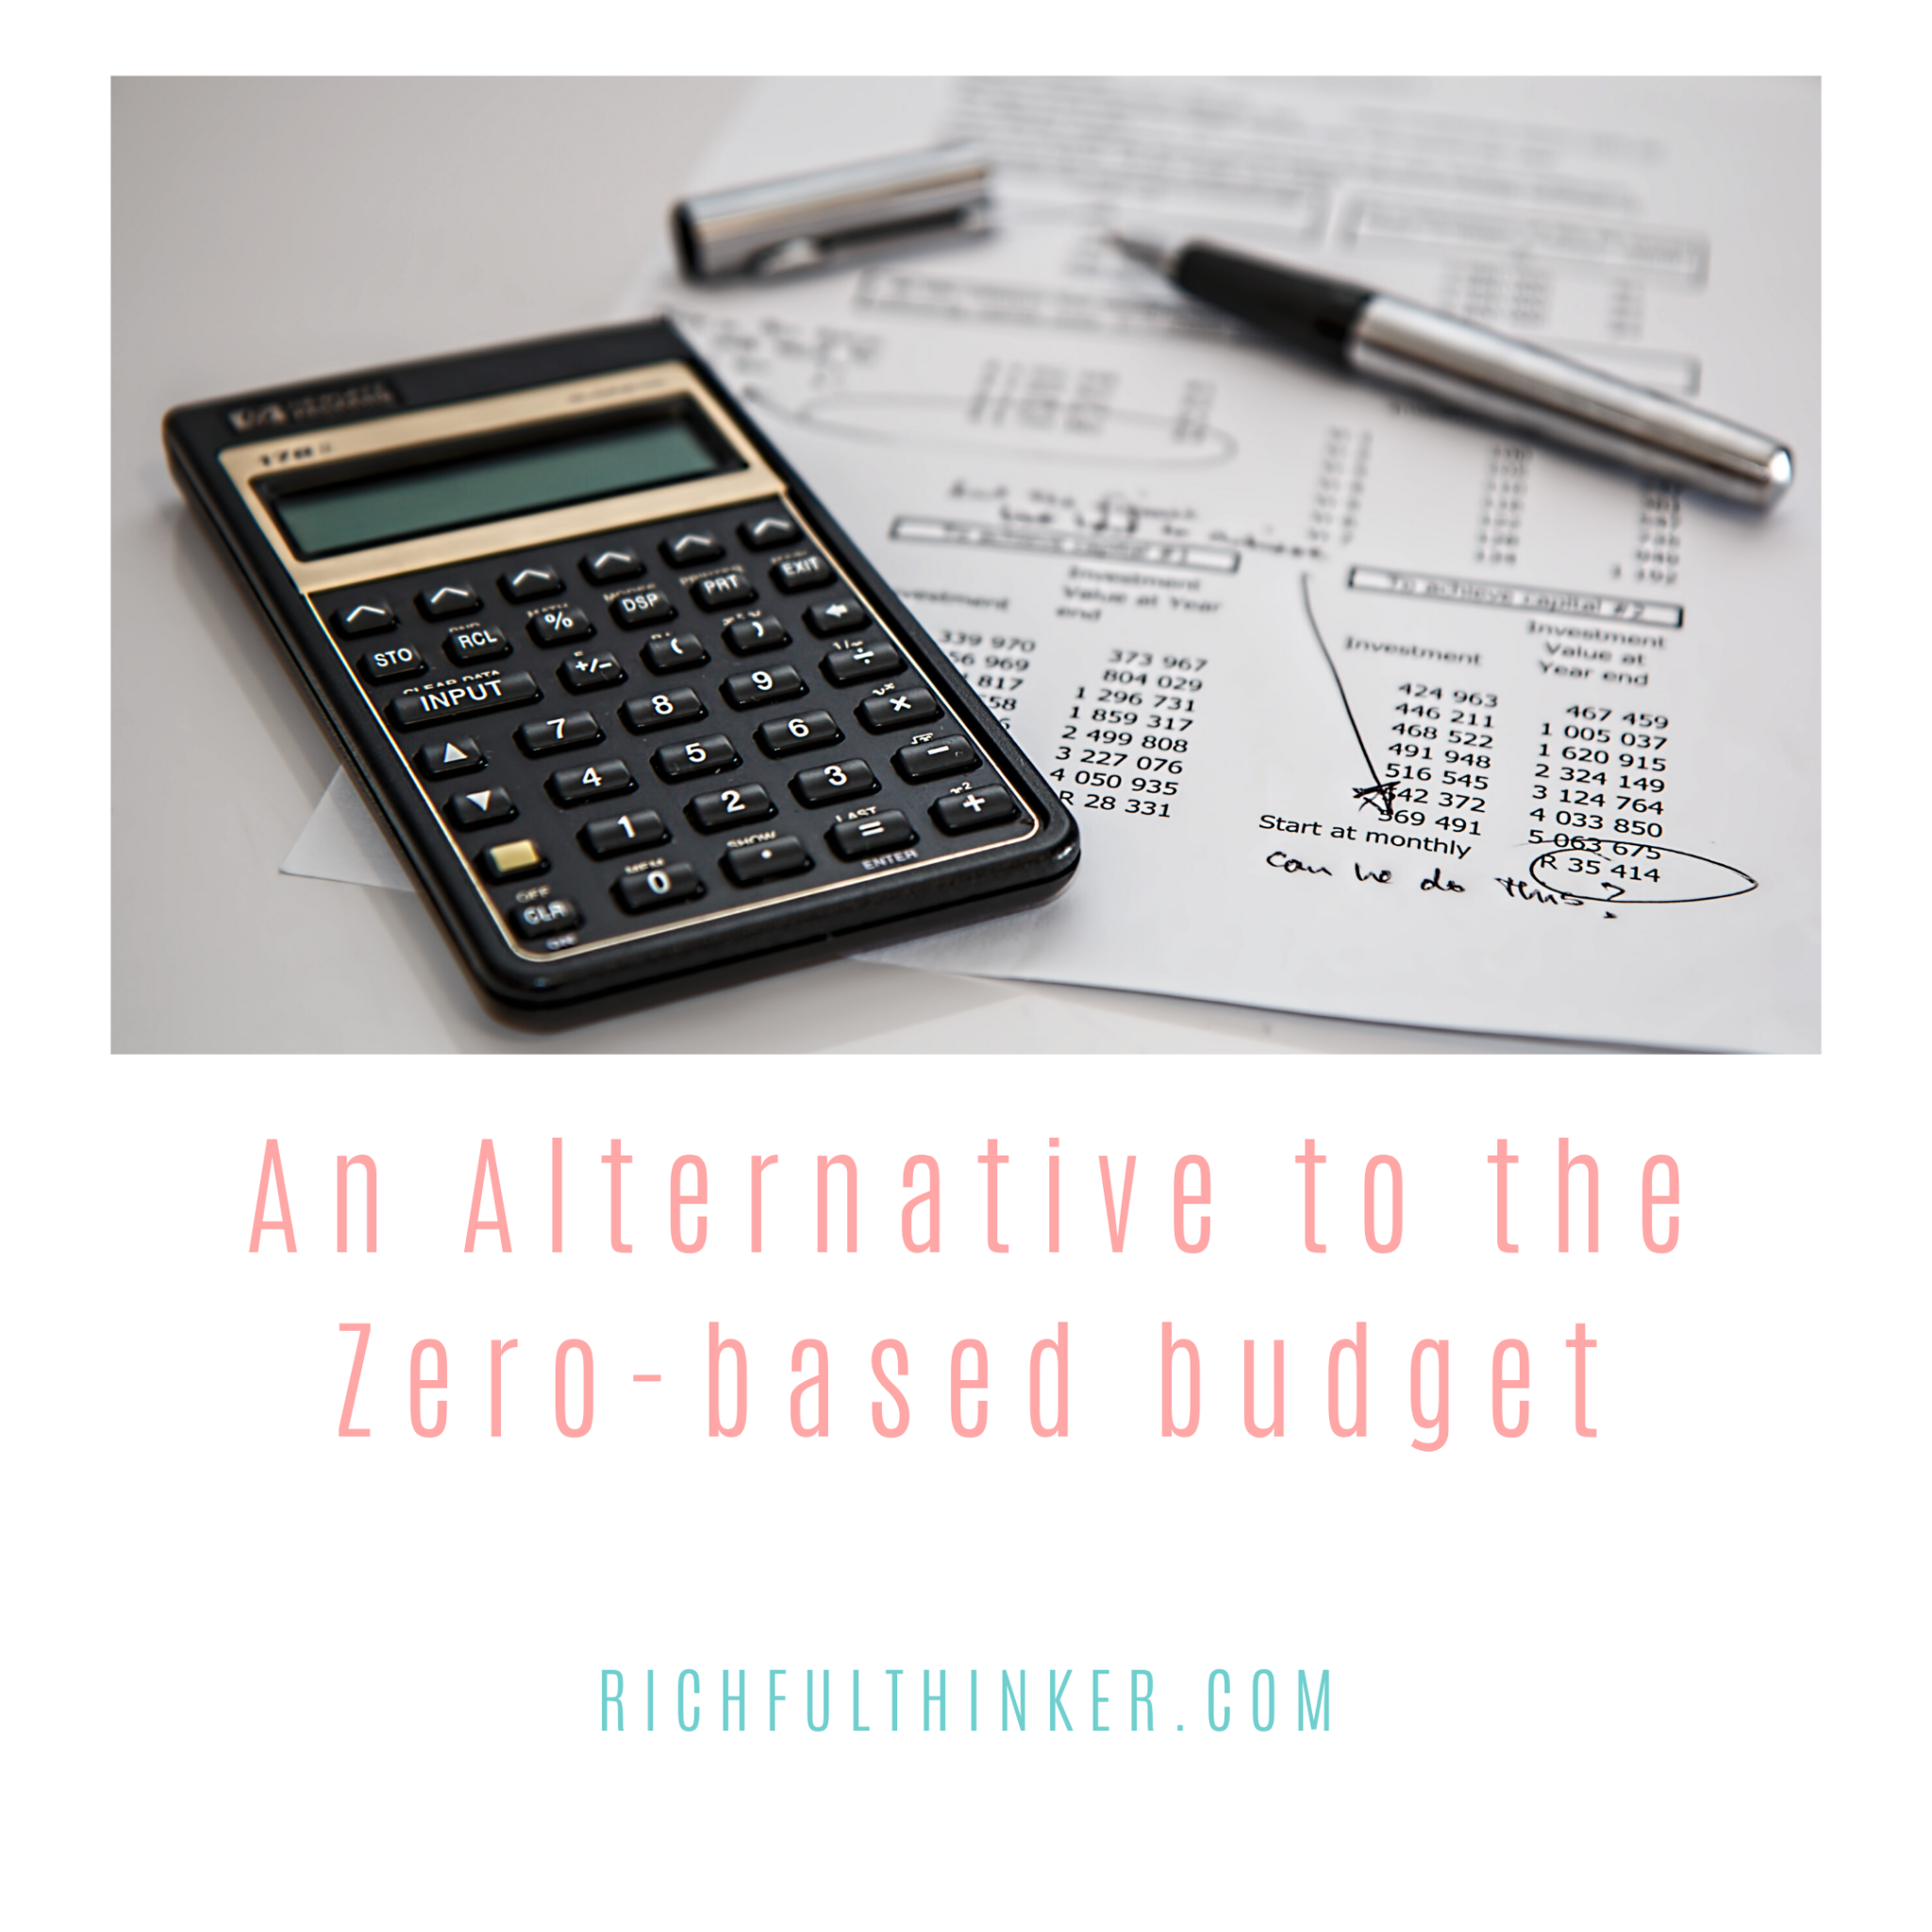 how-to-budget-paycheck-to-paycheck-an-alternative-zero-based-budget